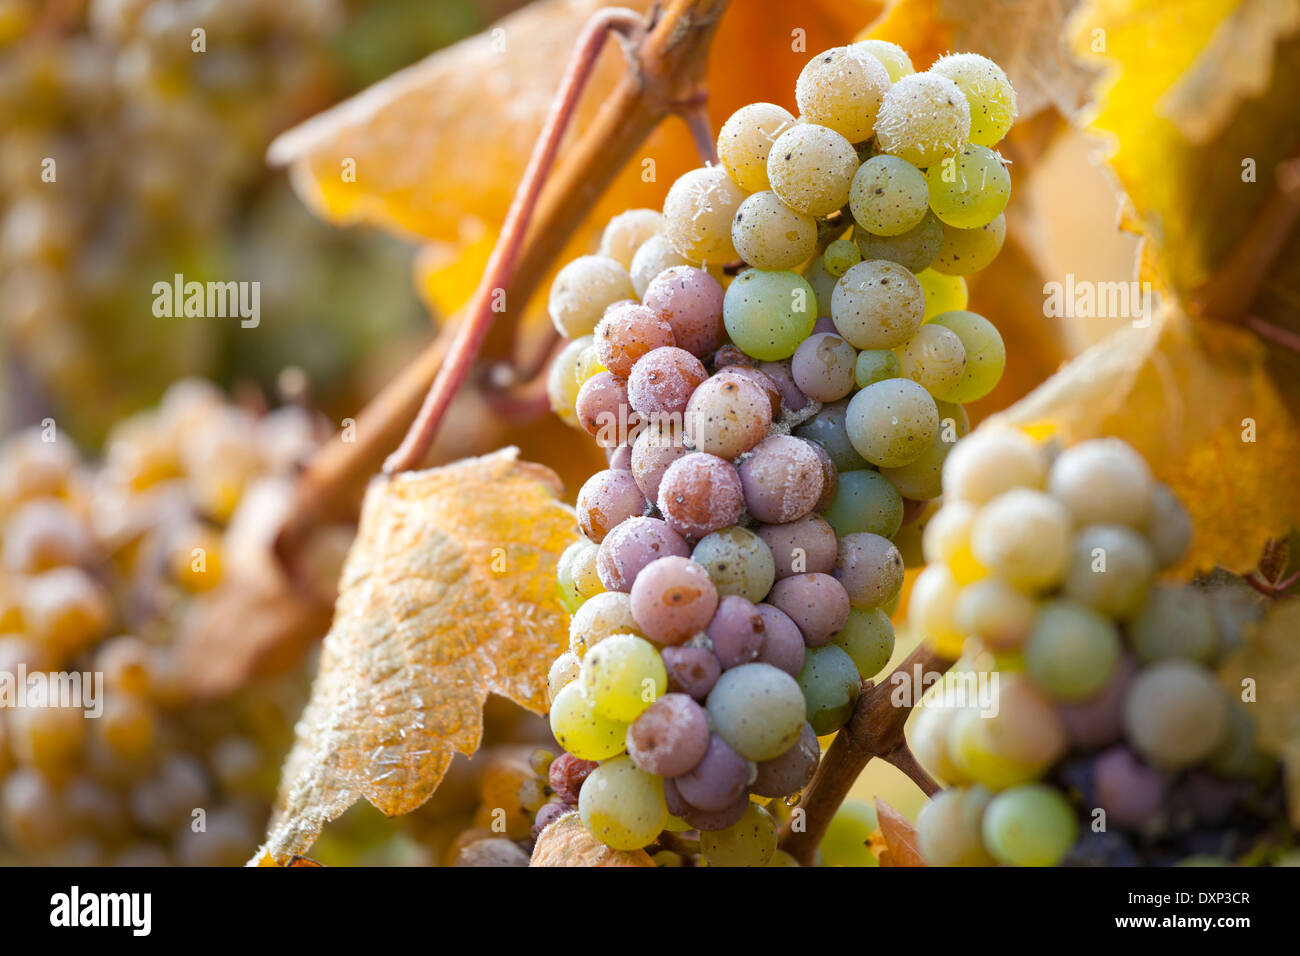 Close-up of Grapes in a Vineyard in Autumn, Mosel River Valley, Moseltal, Germany Stock Photo